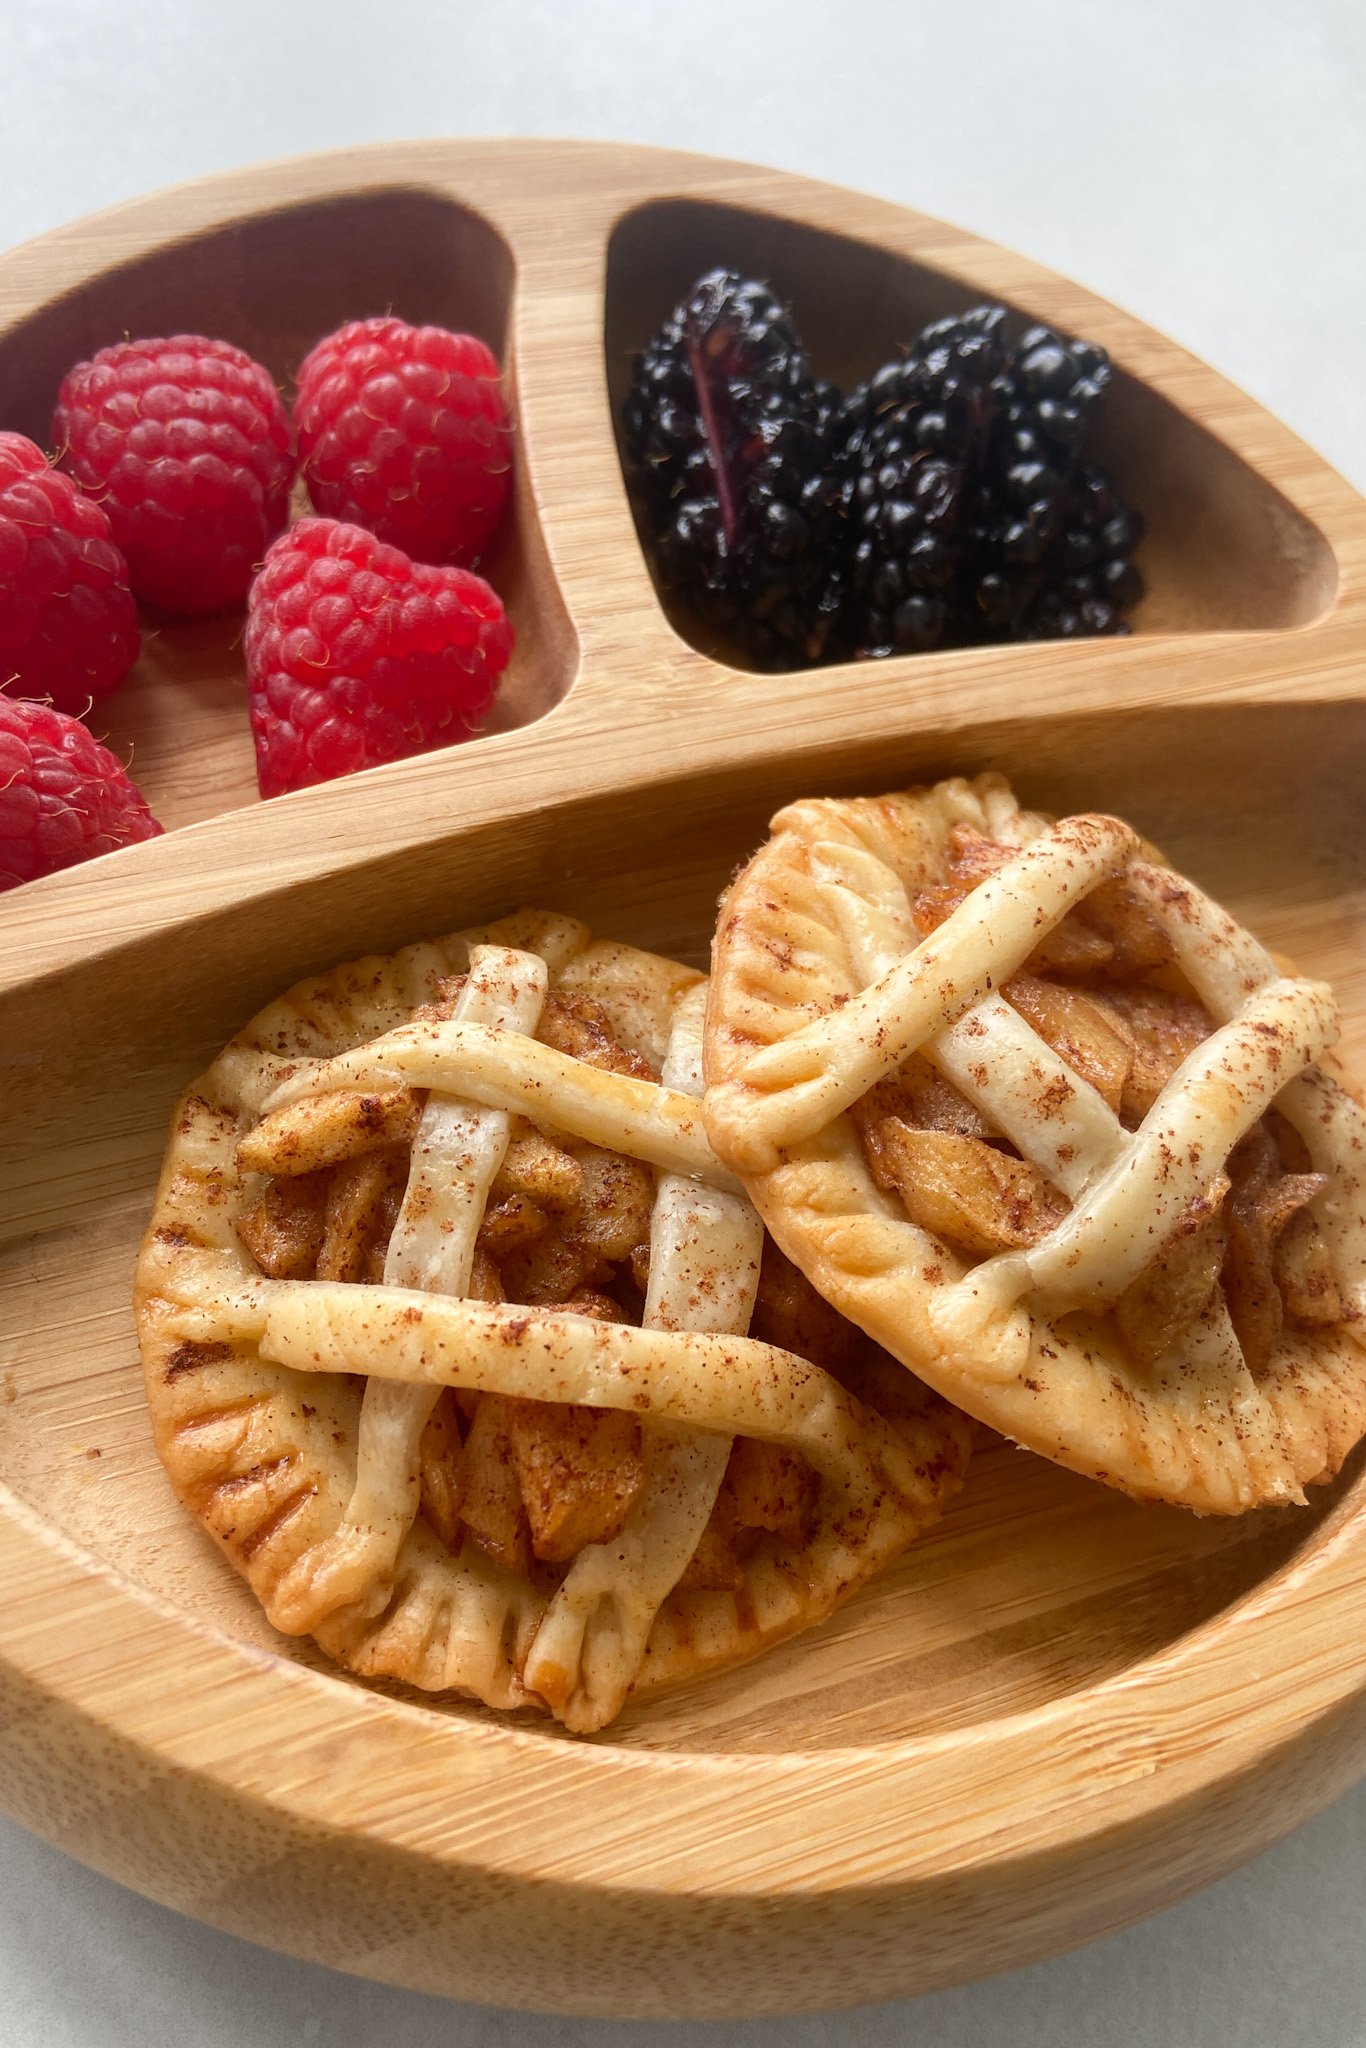 Mini apple pies served with berries